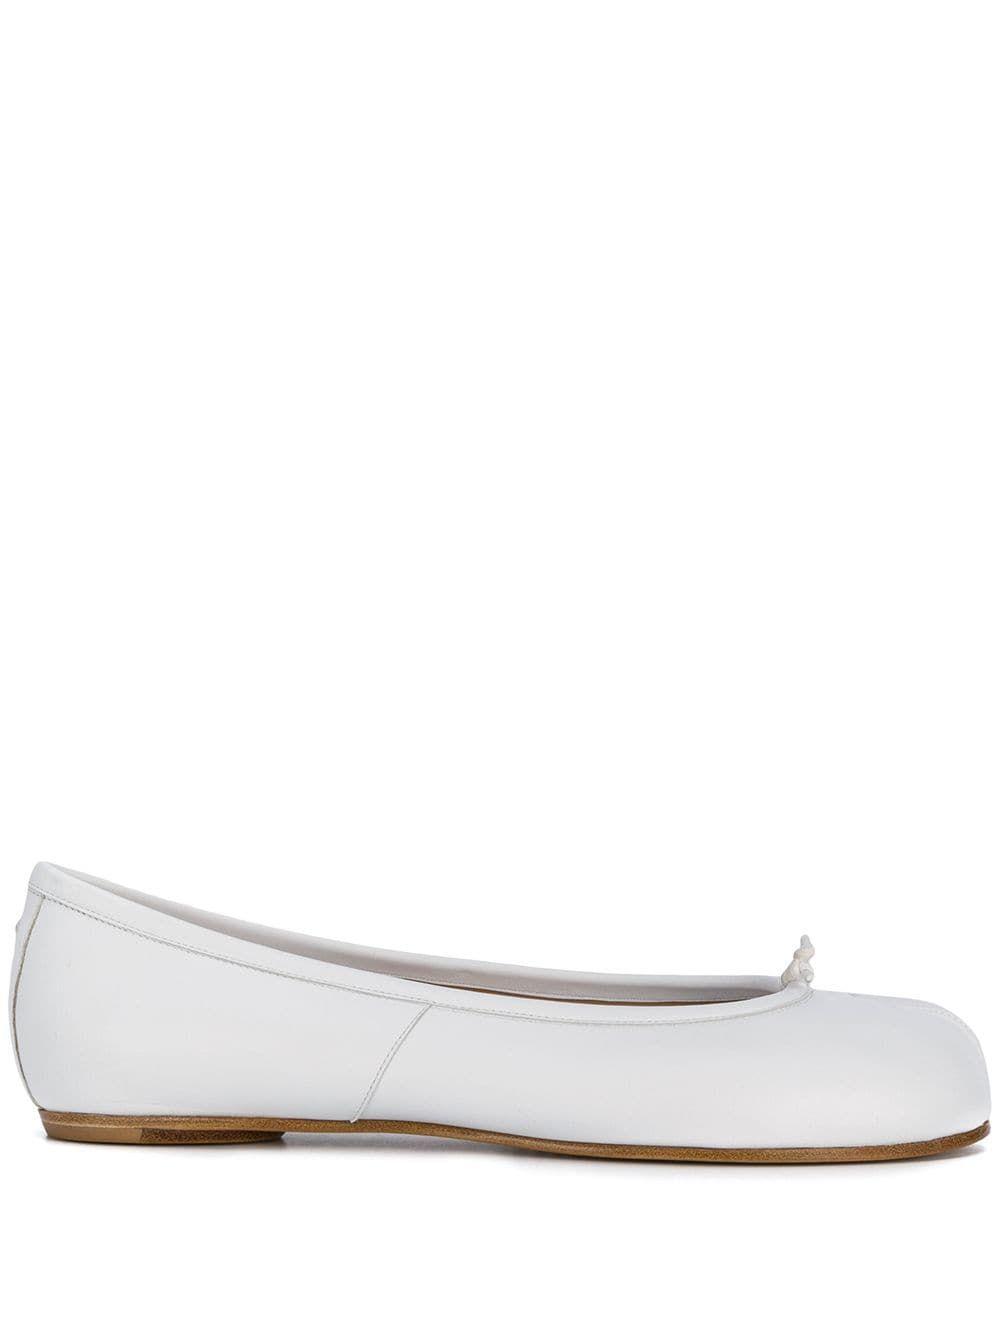 Womens Shoes Flats and flat shoes Ballet flats and ballerina shoes Maison Margiela Tabi Leather Ballet Flats in White 